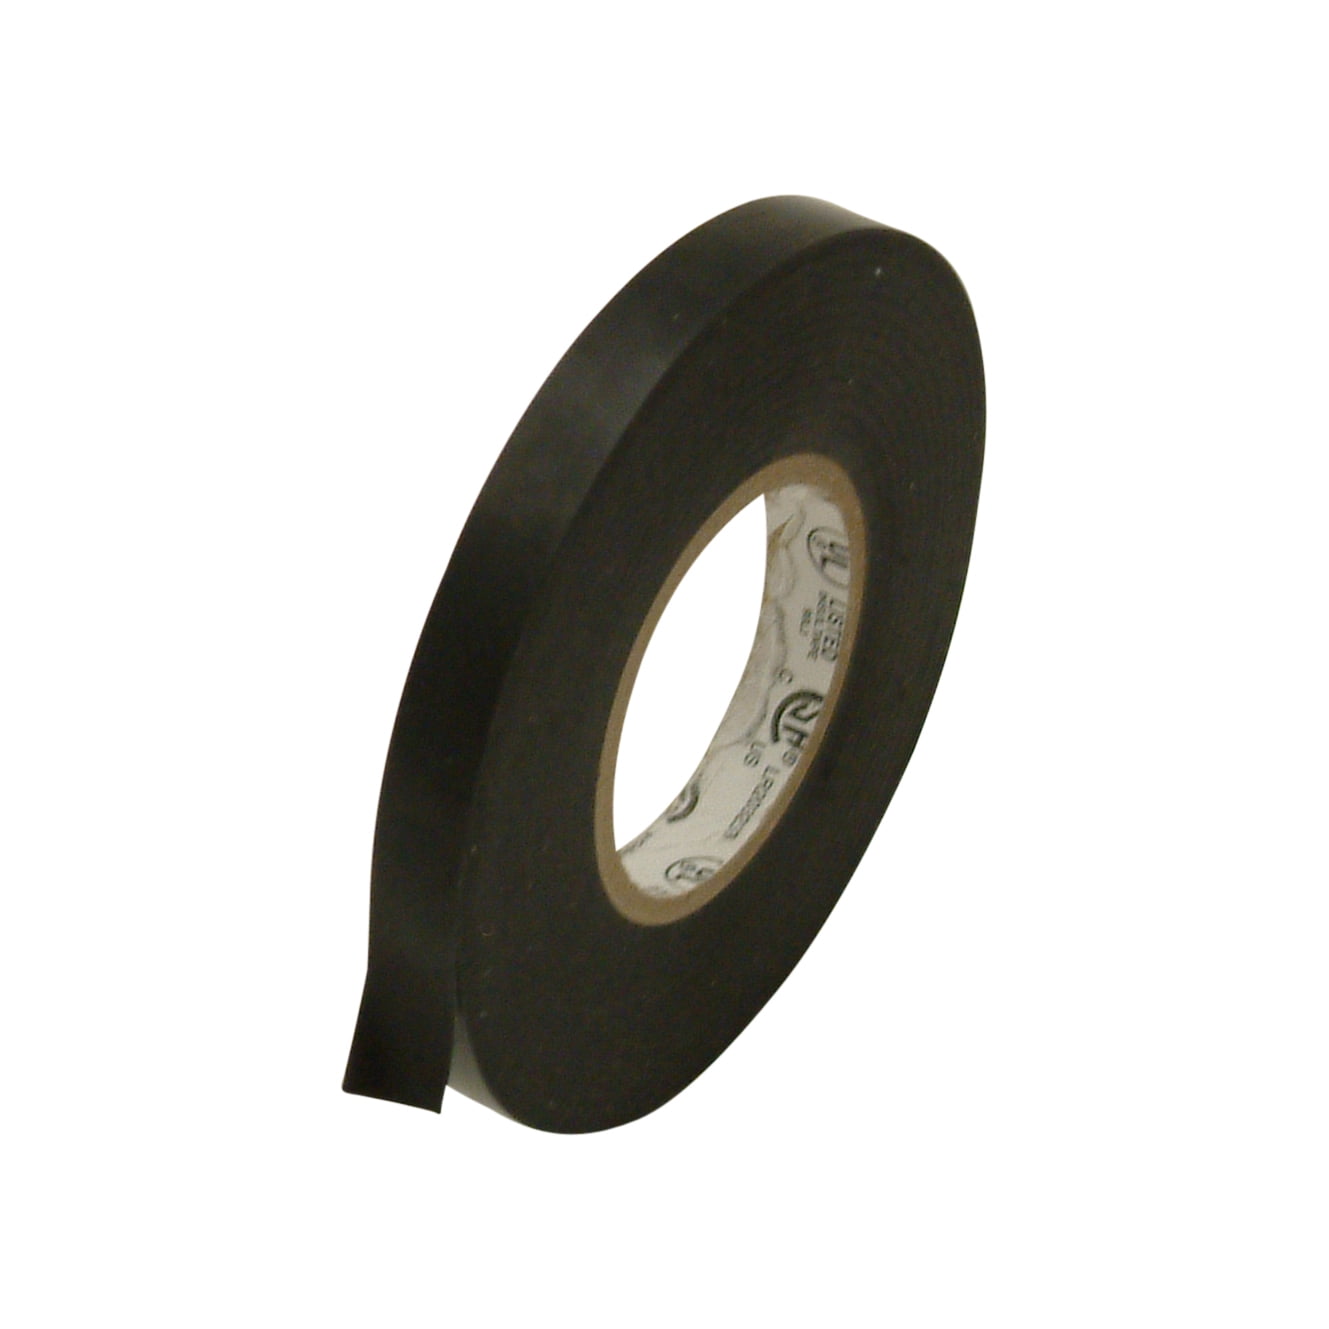 JVCC EL7566-AW Synthetic Rubber Electrical Tape 36mm x 20m 1-1/2 in Black x 66 ft. 